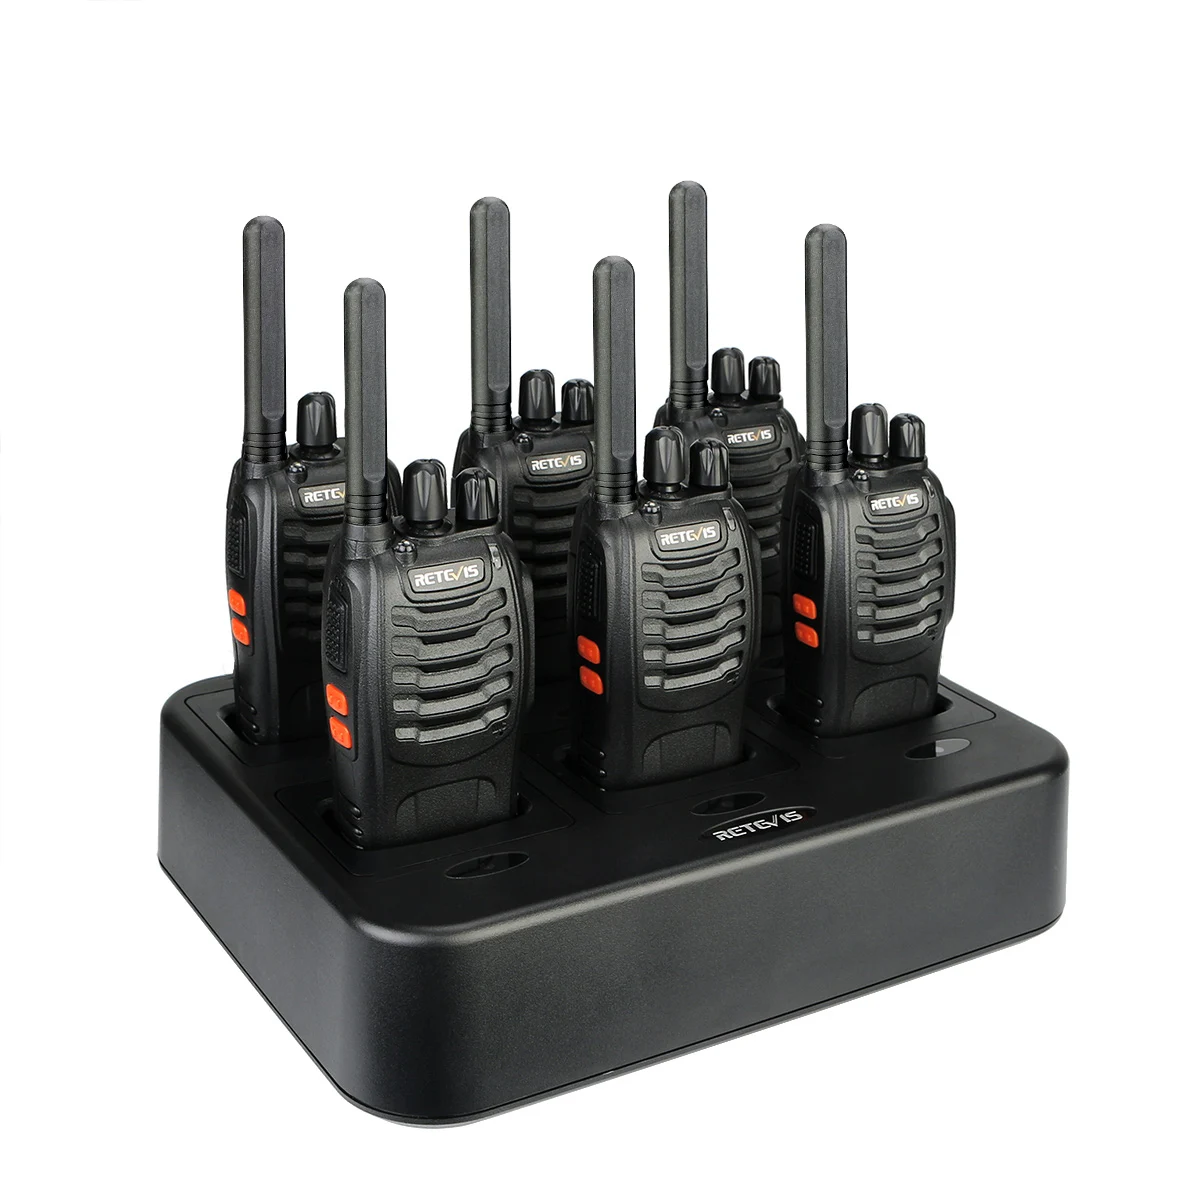 

Retevis H777 Walkie Talkie 2W CTCSS/DCS UHF FRS license free radio 16CH FM Two Way Radio with six way Rapid Charger